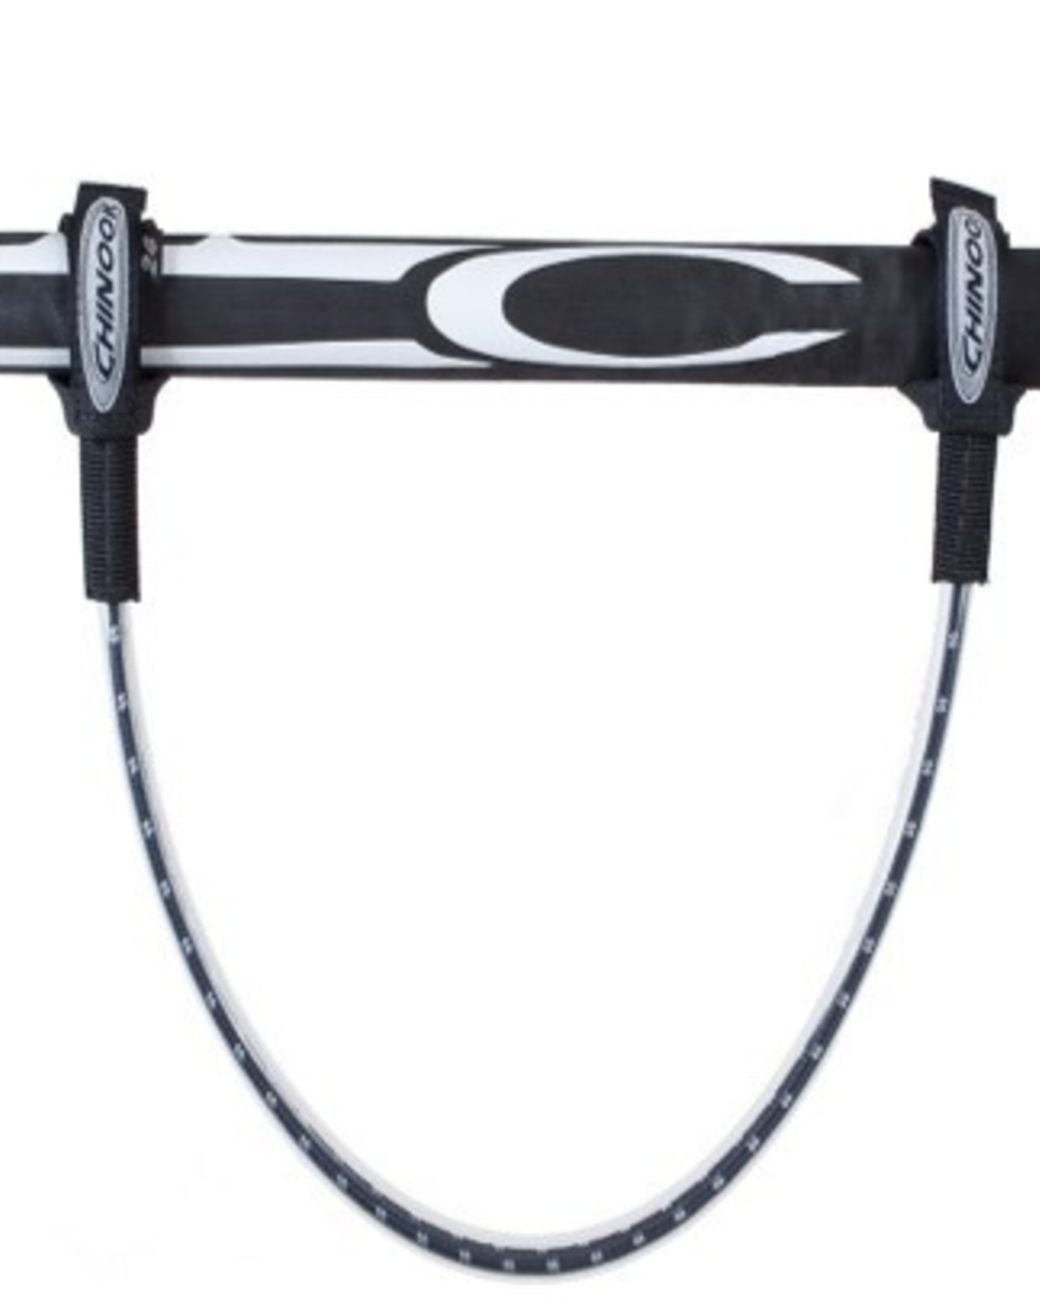 Cime Trapezio Chinook Fixed Harness Lines (Available from 24" to 32" lengths)